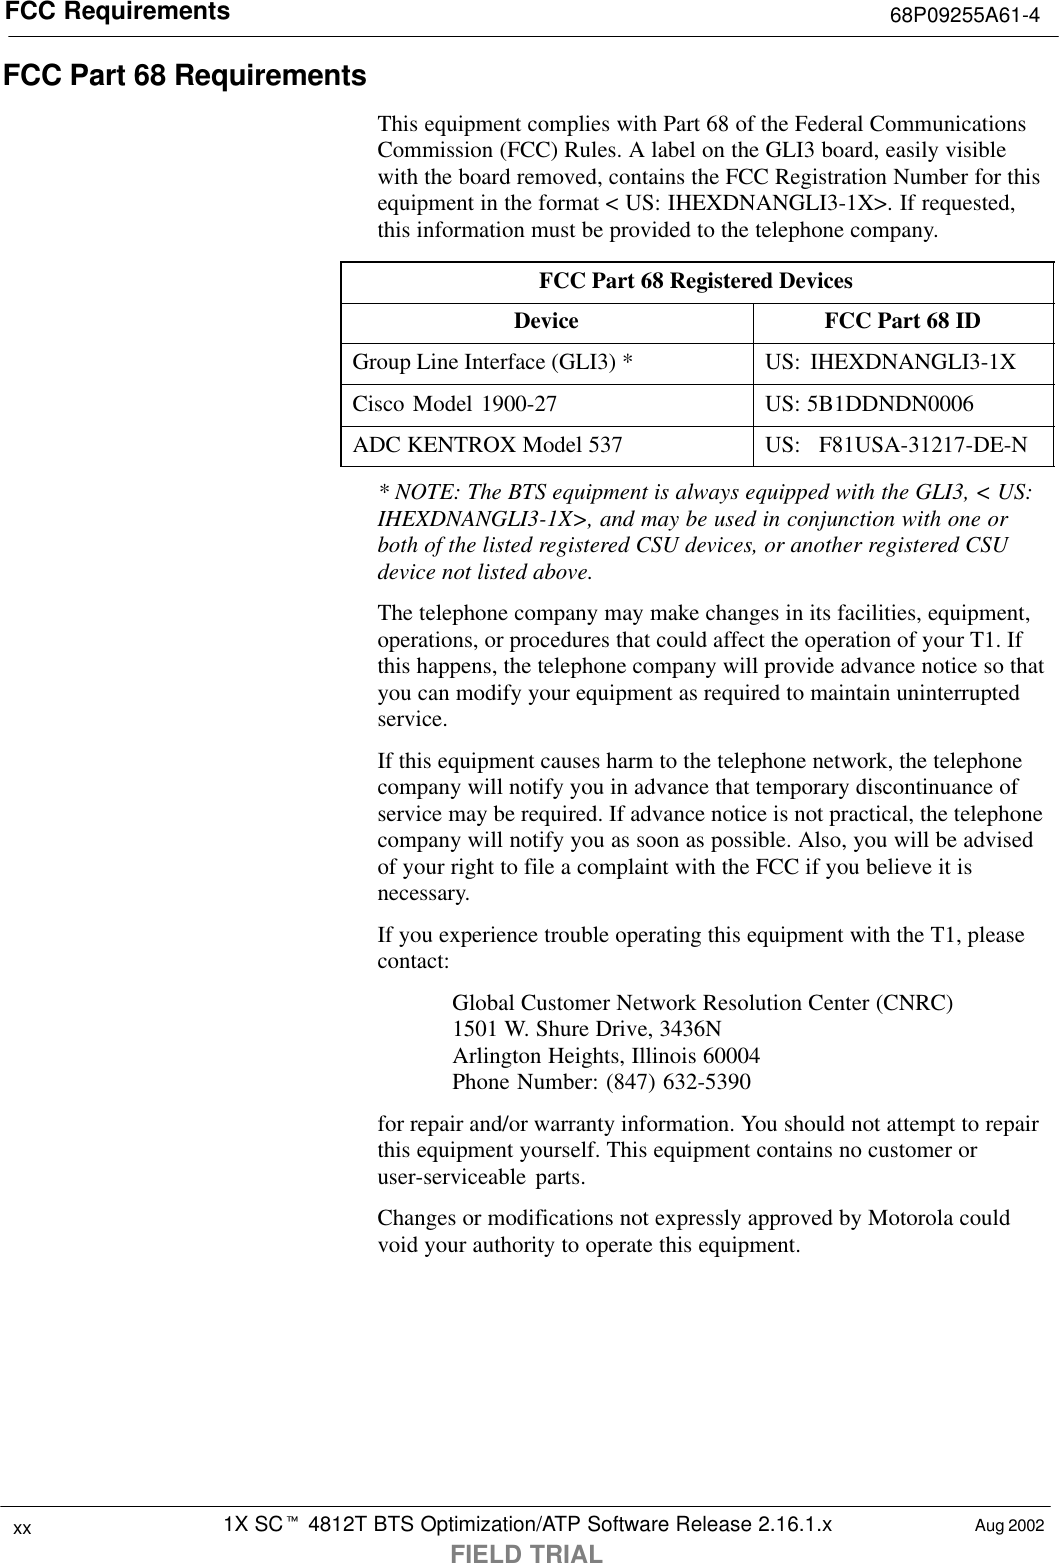 FCC Requirements 68P09255A61-41X SCt 4812T BTS Optimization/ATP Software Release 2.16.1.xFIELD TRIALxx Aug 2002FCC Part 68 RequirementsThis equipment complies with Part 68 of the Federal CommunicationsCommission (FCC) Rules. A label on the GLI3 board, easily visiblewith the board removed, contains the FCC Registration Number for thisequipment in the format &lt; US: IHEXDNANGLI3-1X&gt;. If requested,this information must be provided to the telephone company.FCC Part 68 Registered DevicesDevice FCC Part 68 IDGroup Line Interface (GLI3) * US: IHEXDNANGLI3-1XCisco Model 1900-27 US: 5B1DDNDN0006ADC KENTROX Model 537 US: F81USA-31217-DE-N* NOTE: The BTS equipment is always equipped with the GLI3, &lt; US:IHEXDNANGLI3-1X&gt;, and may be used in conjunction with one orboth of the listed registered CSU devices, or another registered CSUdevice not listed above.The telephone company may make changes in its facilities, equipment,operations, or procedures that could affect the operation of your T1. Ifthis happens, the telephone company will provide advance notice so thatyou can modify your equipment as required to maintain uninterruptedservice.If this equipment causes harm to the telephone network, the telephonecompany will notify you in advance that temporary discontinuance ofservice may be required. If advance notice is not practical, the telephonecompany will notify you as soon as possible. Also, you will be advisedof your right to file a complaint with the FCC if you believe it isnecessary.If you experience trouble operating this equipment with the T1, pleasecontact:Global Customer Network Resolution Center (CNRC)1501 W. Shure Drive, 3436NArlington Heights, Illinois 60004Phone Number: (847) 632-5390for repair and/or warranty information. You should not attempt to repairthis equipment yourself. This equipment contains no customer oruser-serviceable parts.Changes or modifications not expressly approved by Motorola couldvoid your authority to operate this equipment.